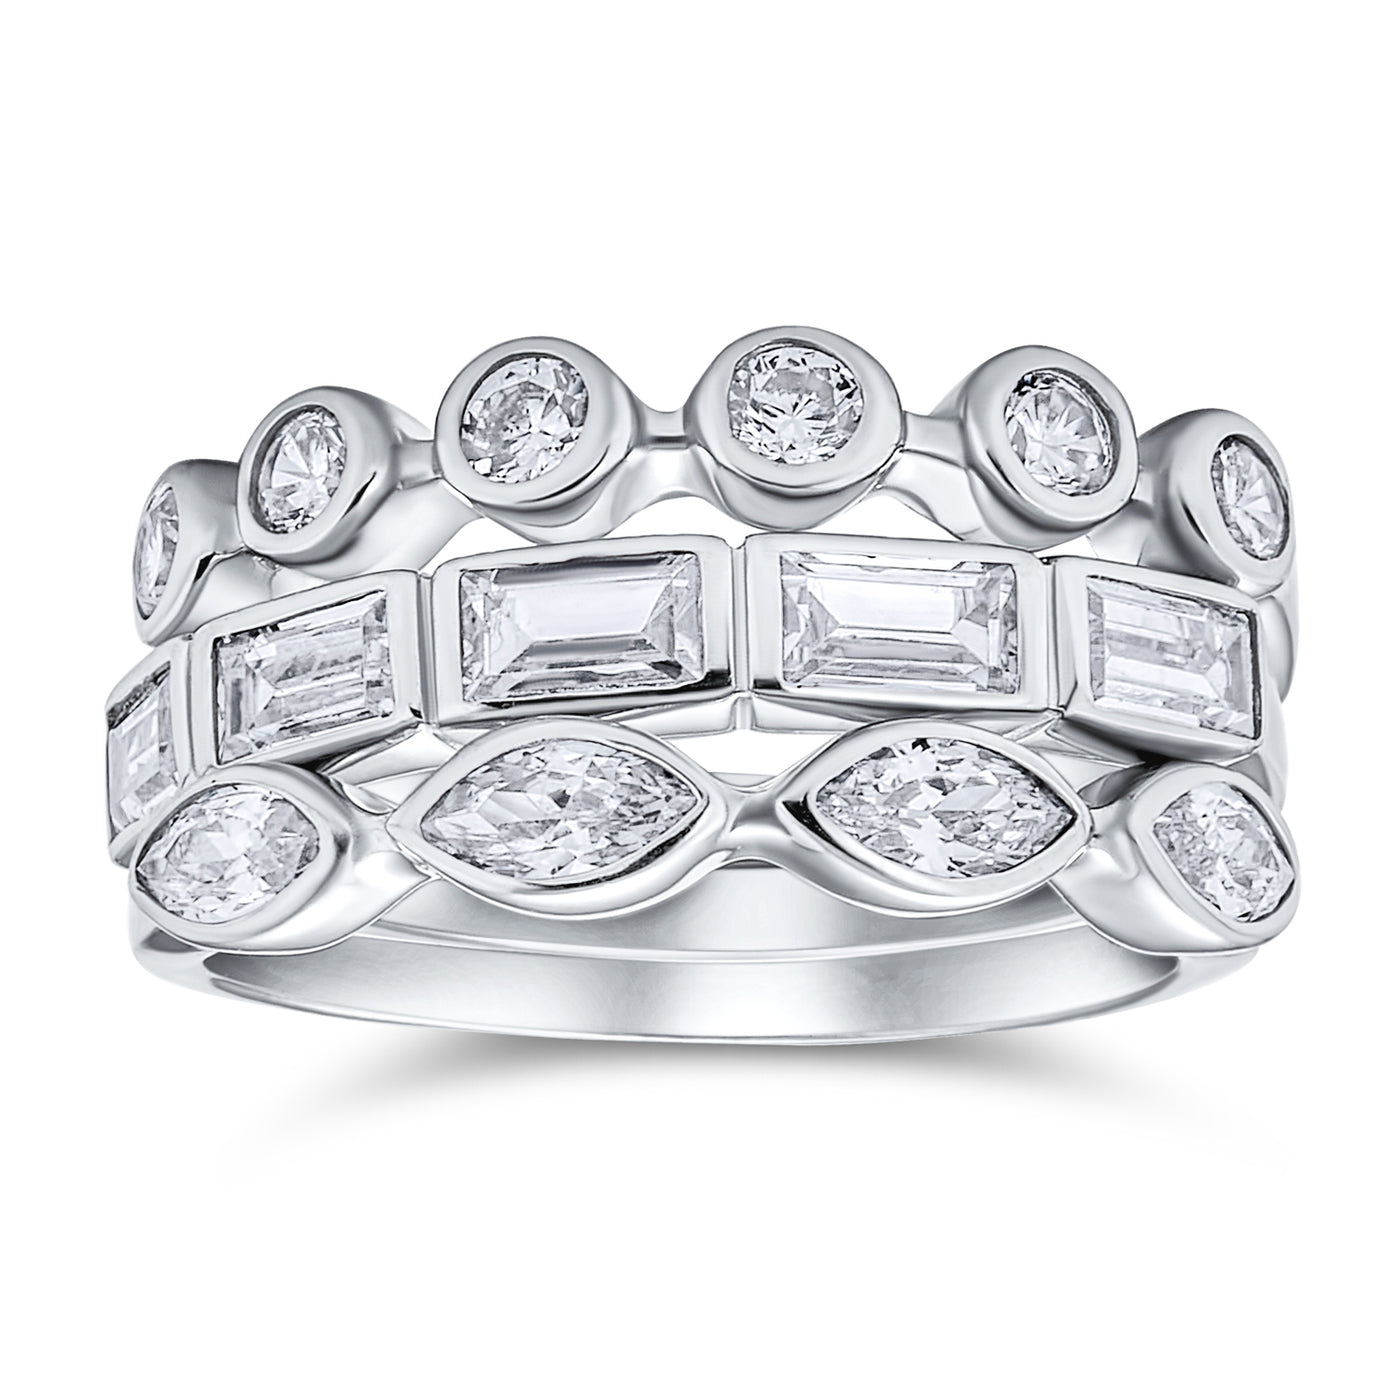 Stackable Baguette Marquise CZ Wedding Band Ring Set Sterling Silver